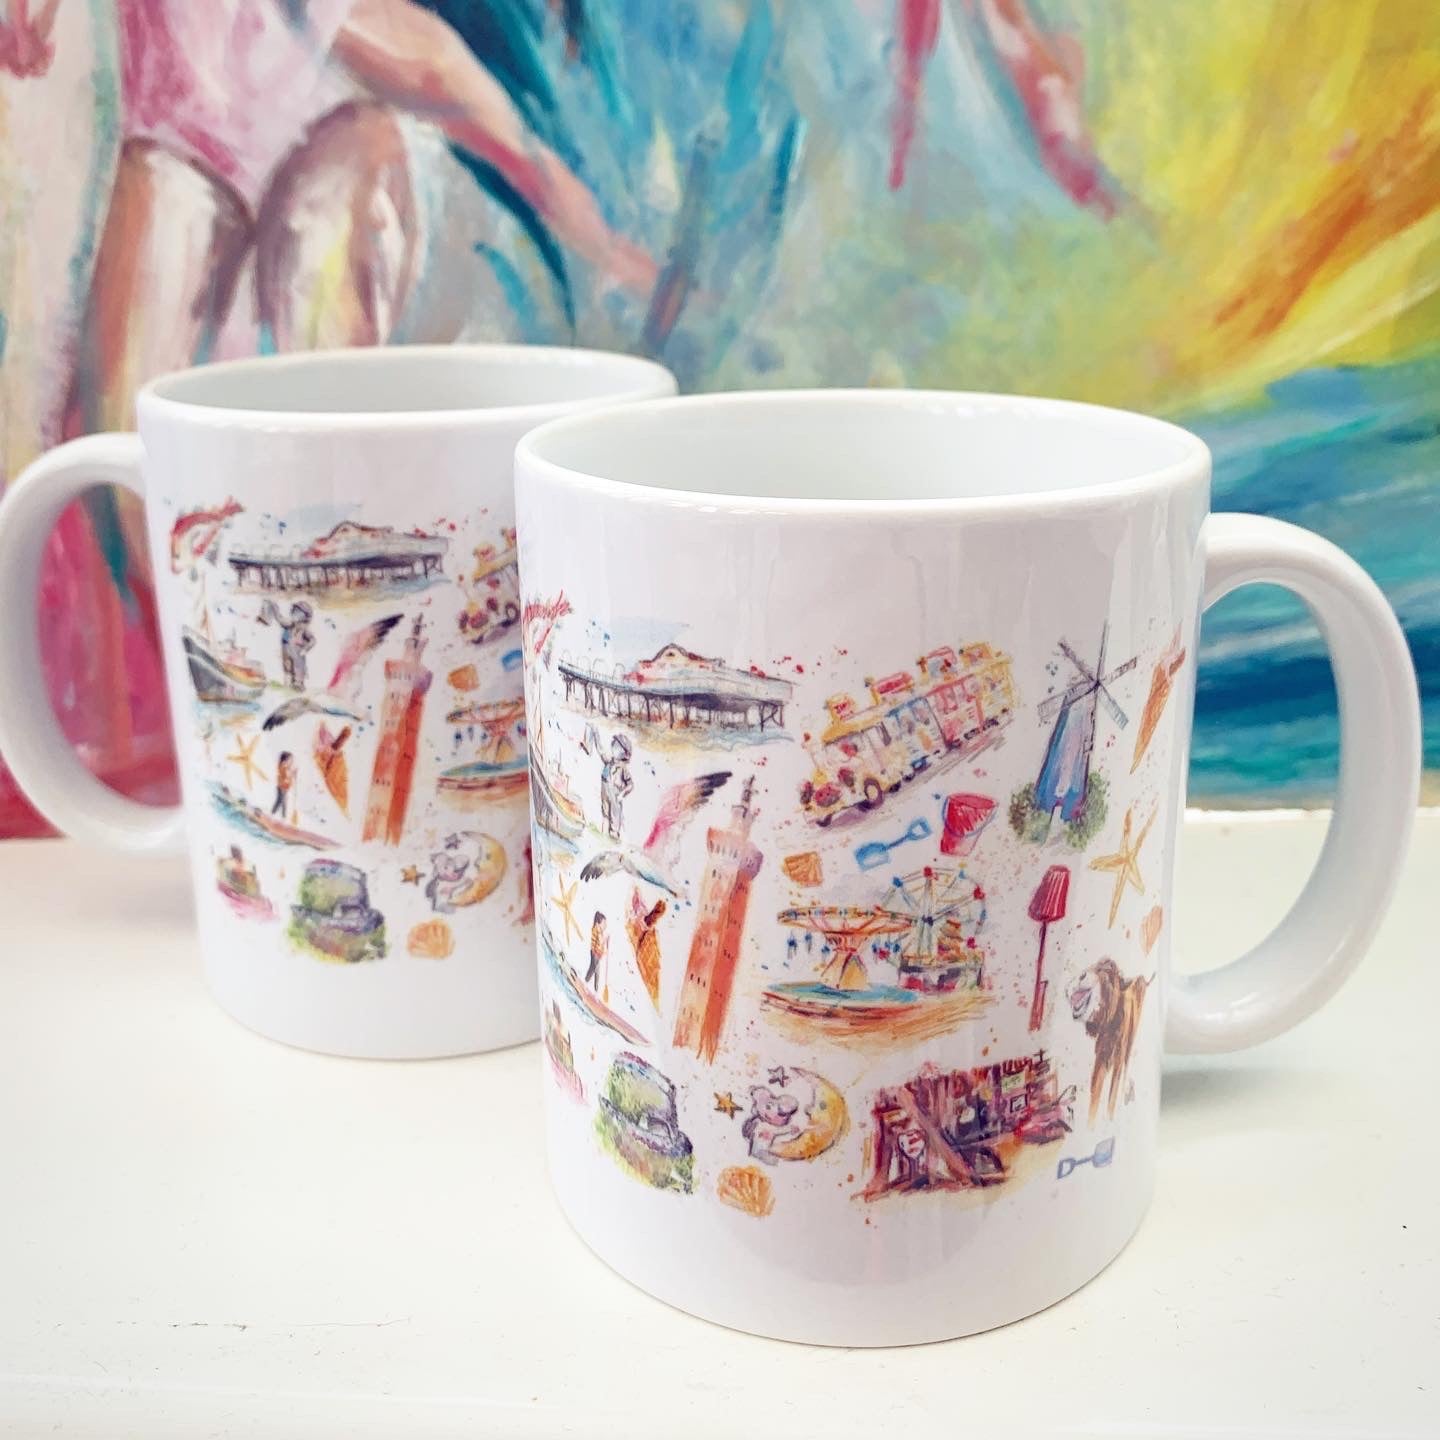 Two 11oz ceramic mugs featuring illustrations of local landmarks by Cleethorpes artist, Eve Leoni Smith.